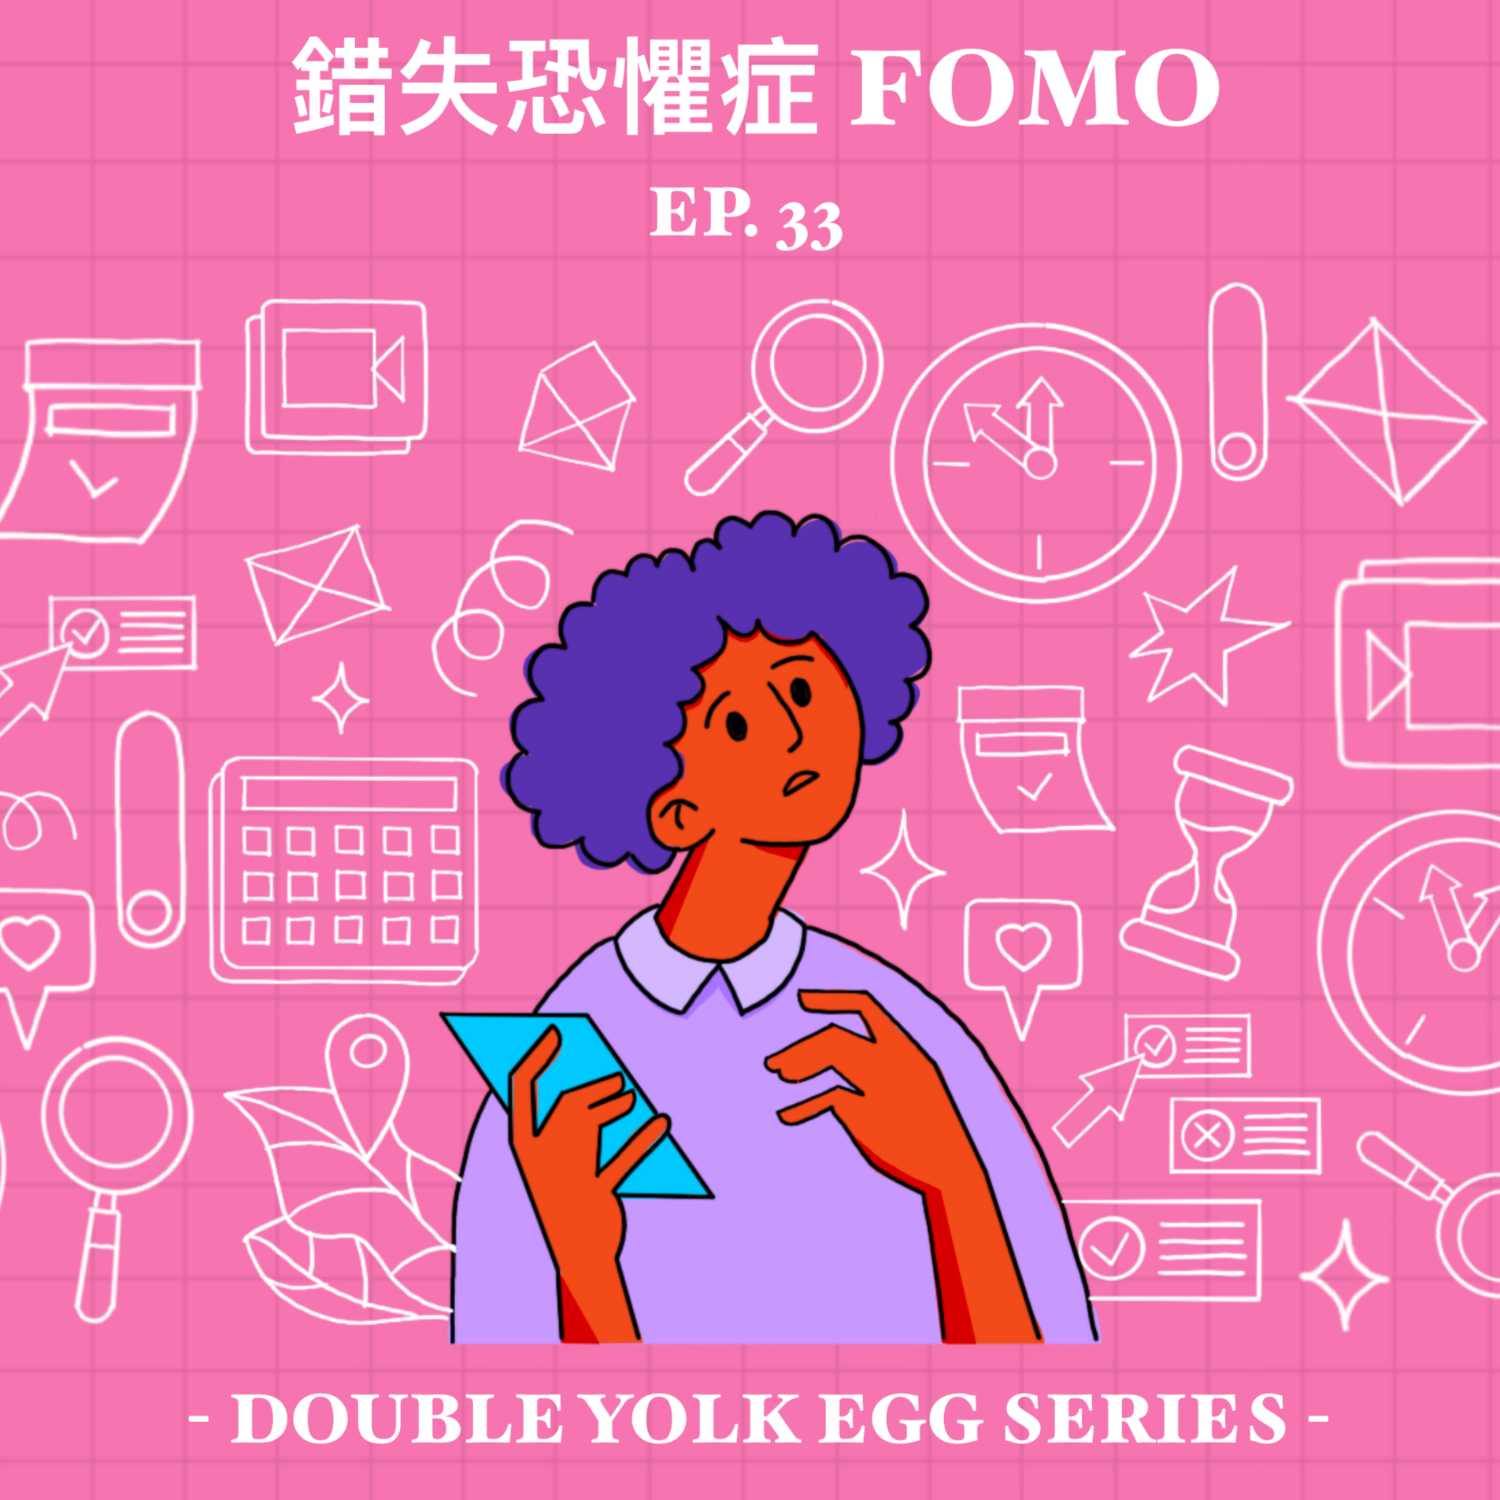 EP33 - 錯失恐懼症 Fear of Missing Out "FOMO" [HK]